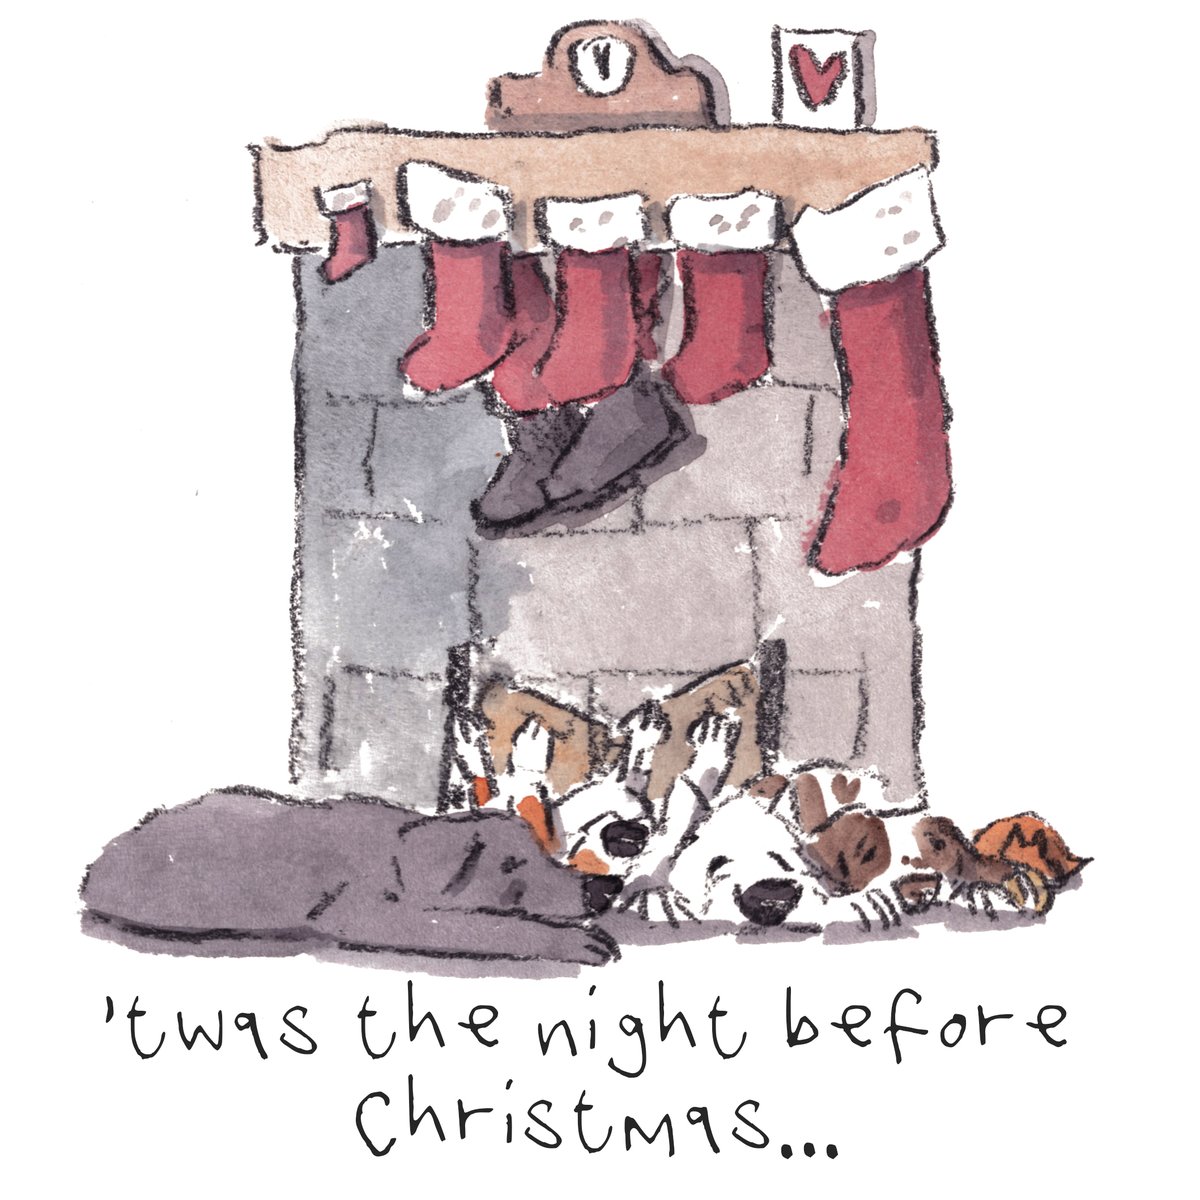 Good night, lovely people and lovely dogs.
The team are resting for tomorrow.
Sleep well and sweet dreams.
I'm wishing you the very best for a really wonderful day tomorrow. 
#hoorayfordogs #labrador #beagle #westie #springer #redsquirrel #FatherChristmas